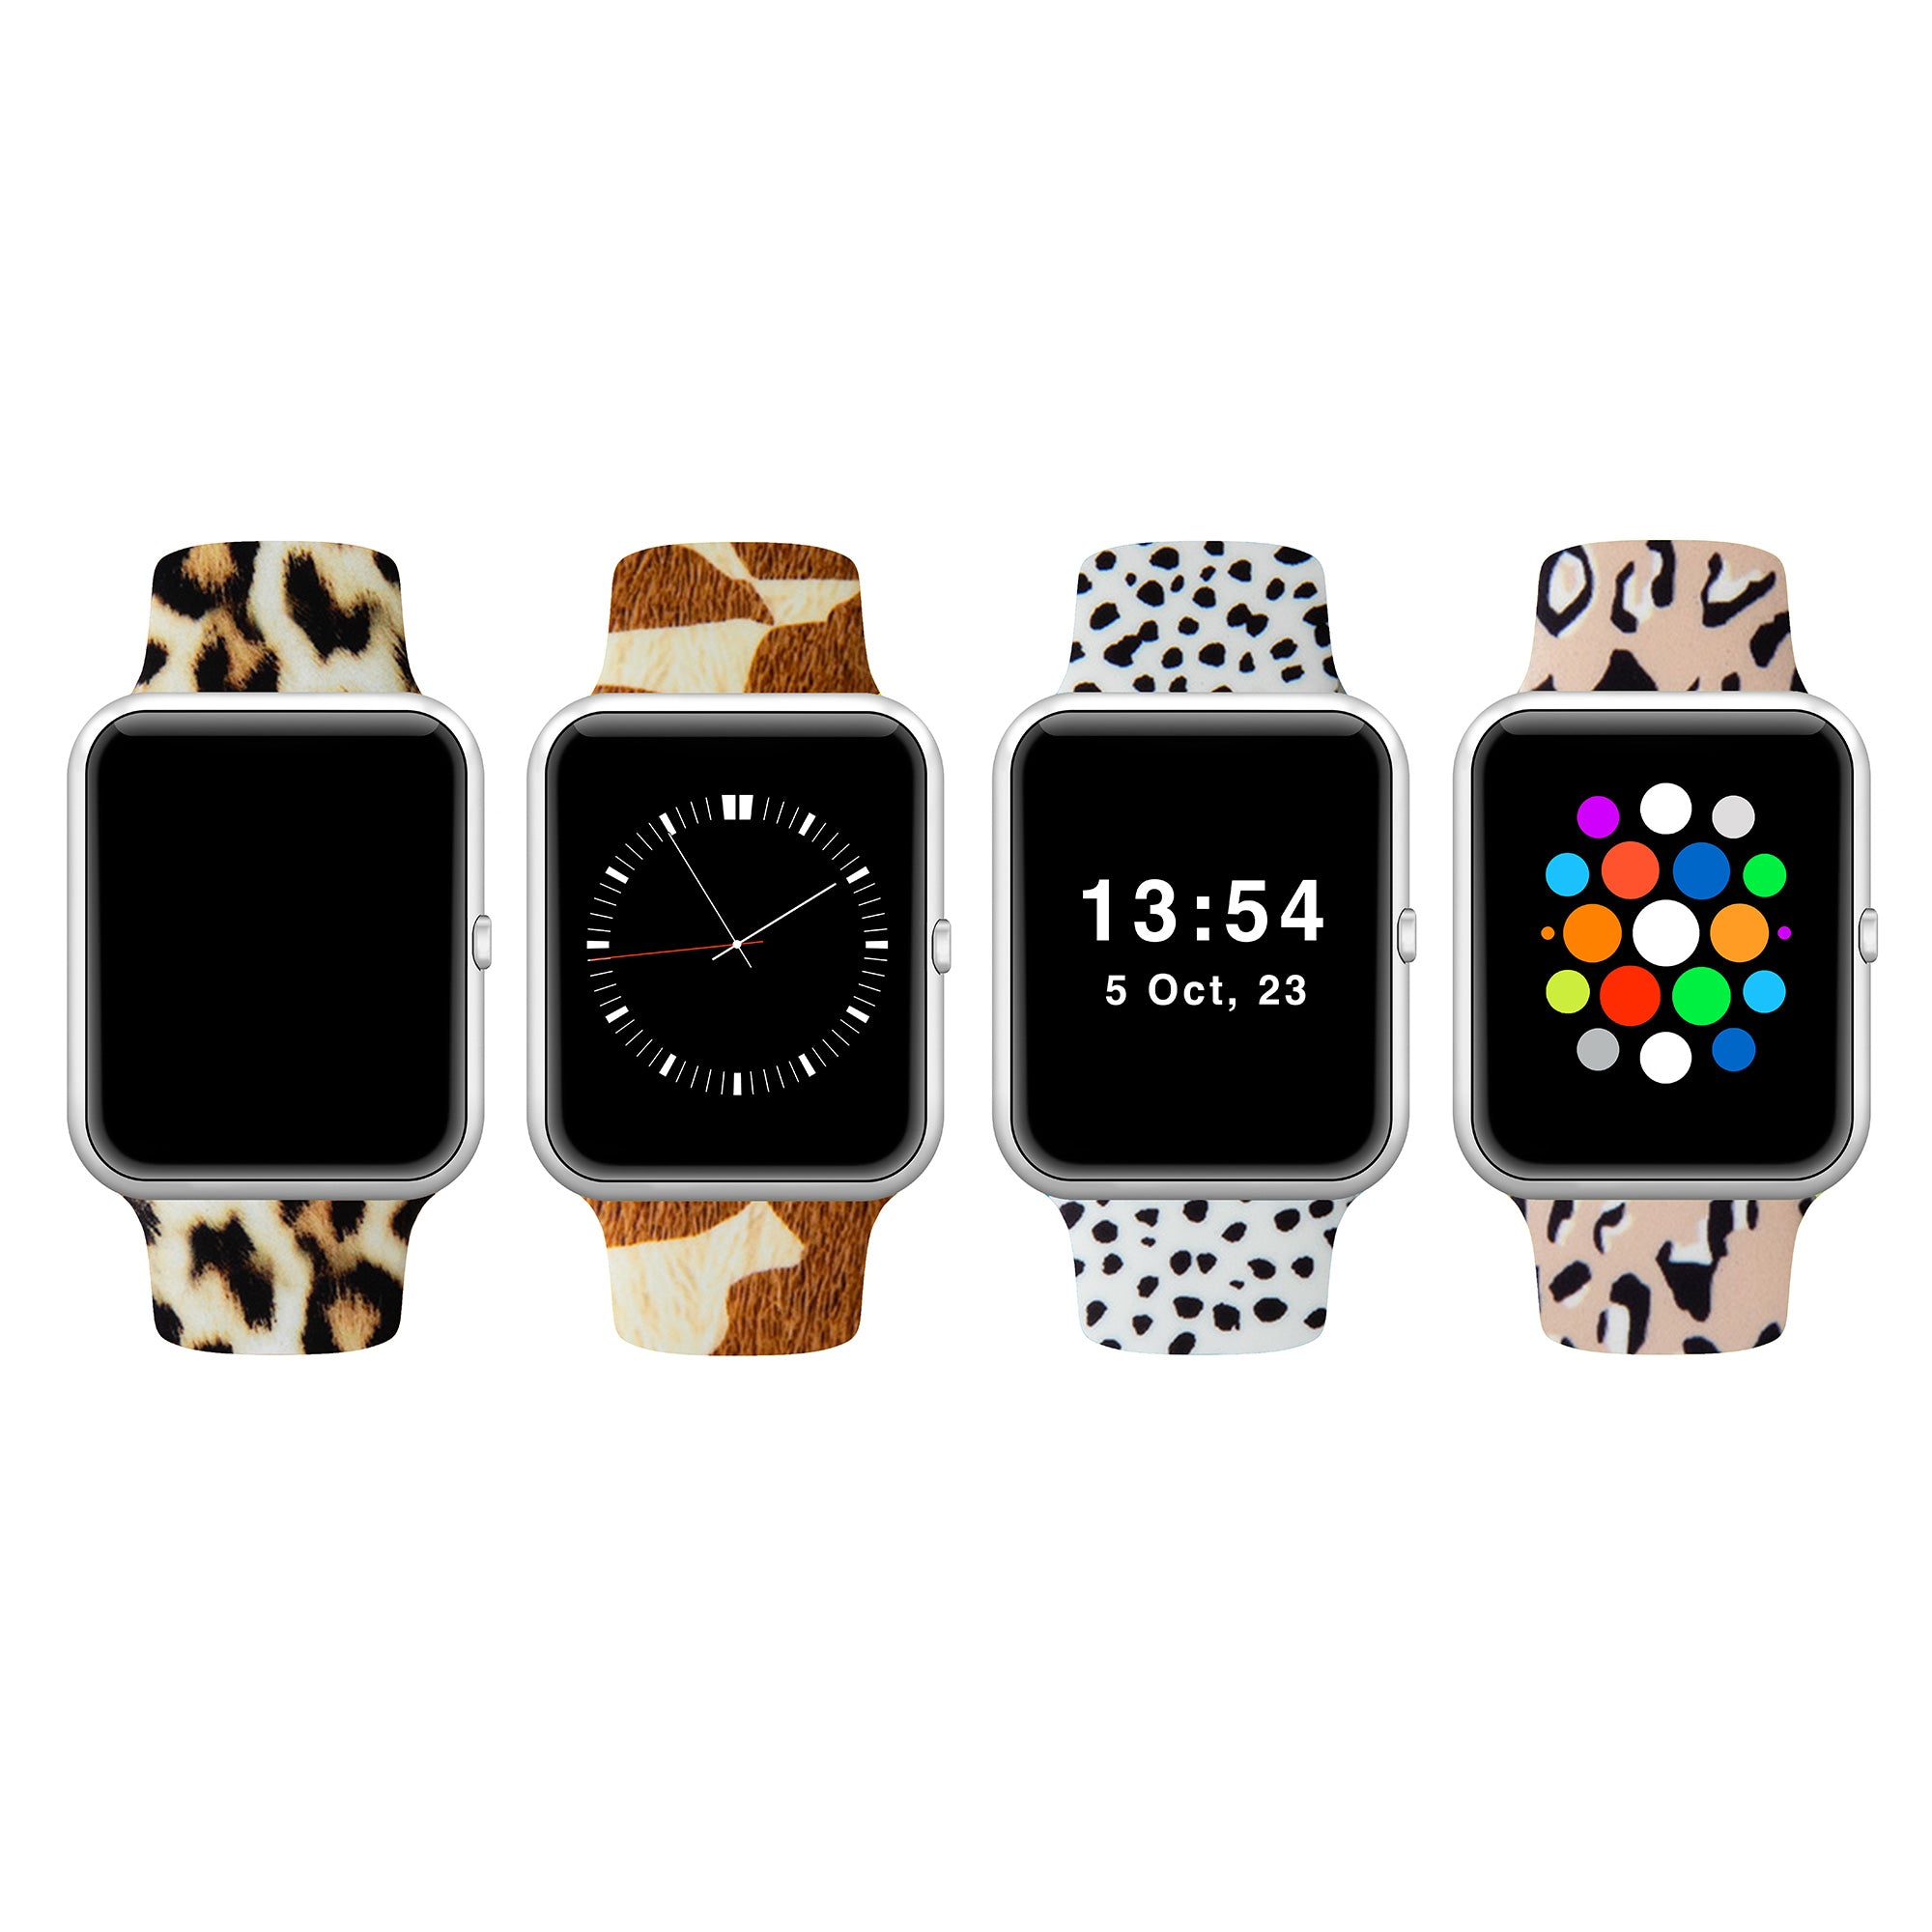 Patterned Silicone Apple Watch Band 38mm/40mm 42mm/44mm - Rainbow Paw Print - 42mm/44mm